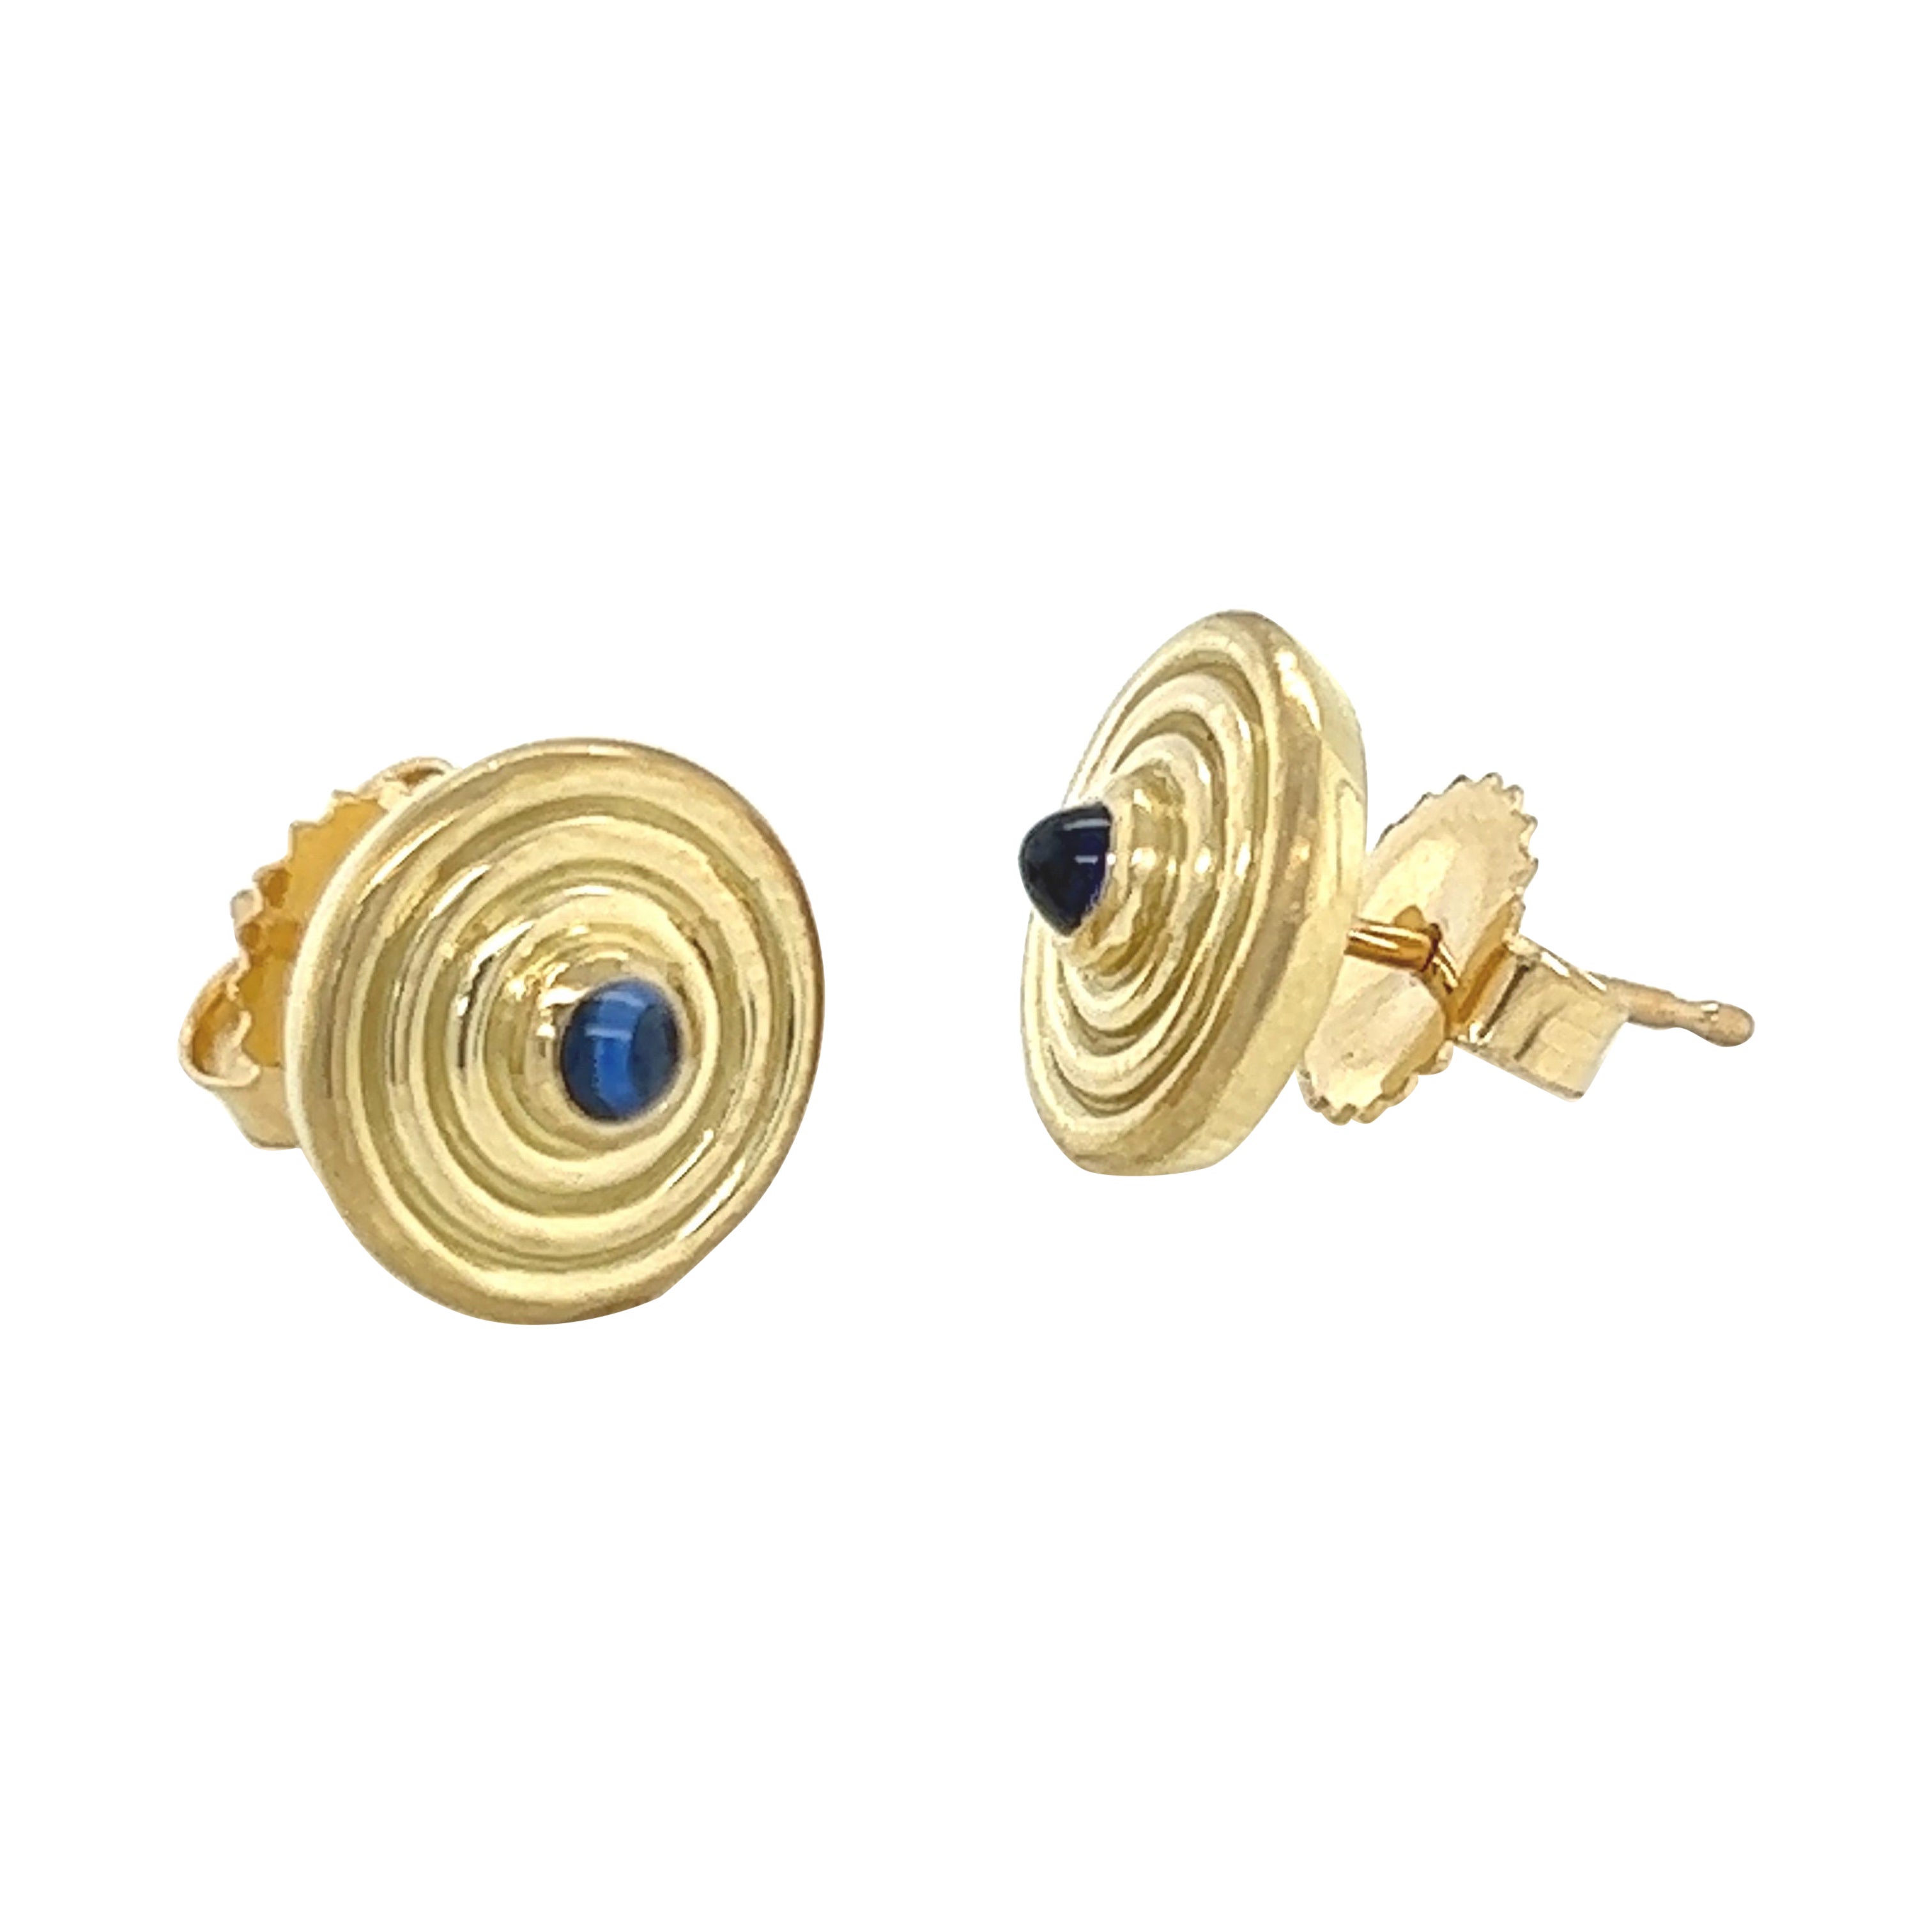 18k Yellow Gold Circular Multi Ring Stud Earrings with Cabochon Blue Sapphires